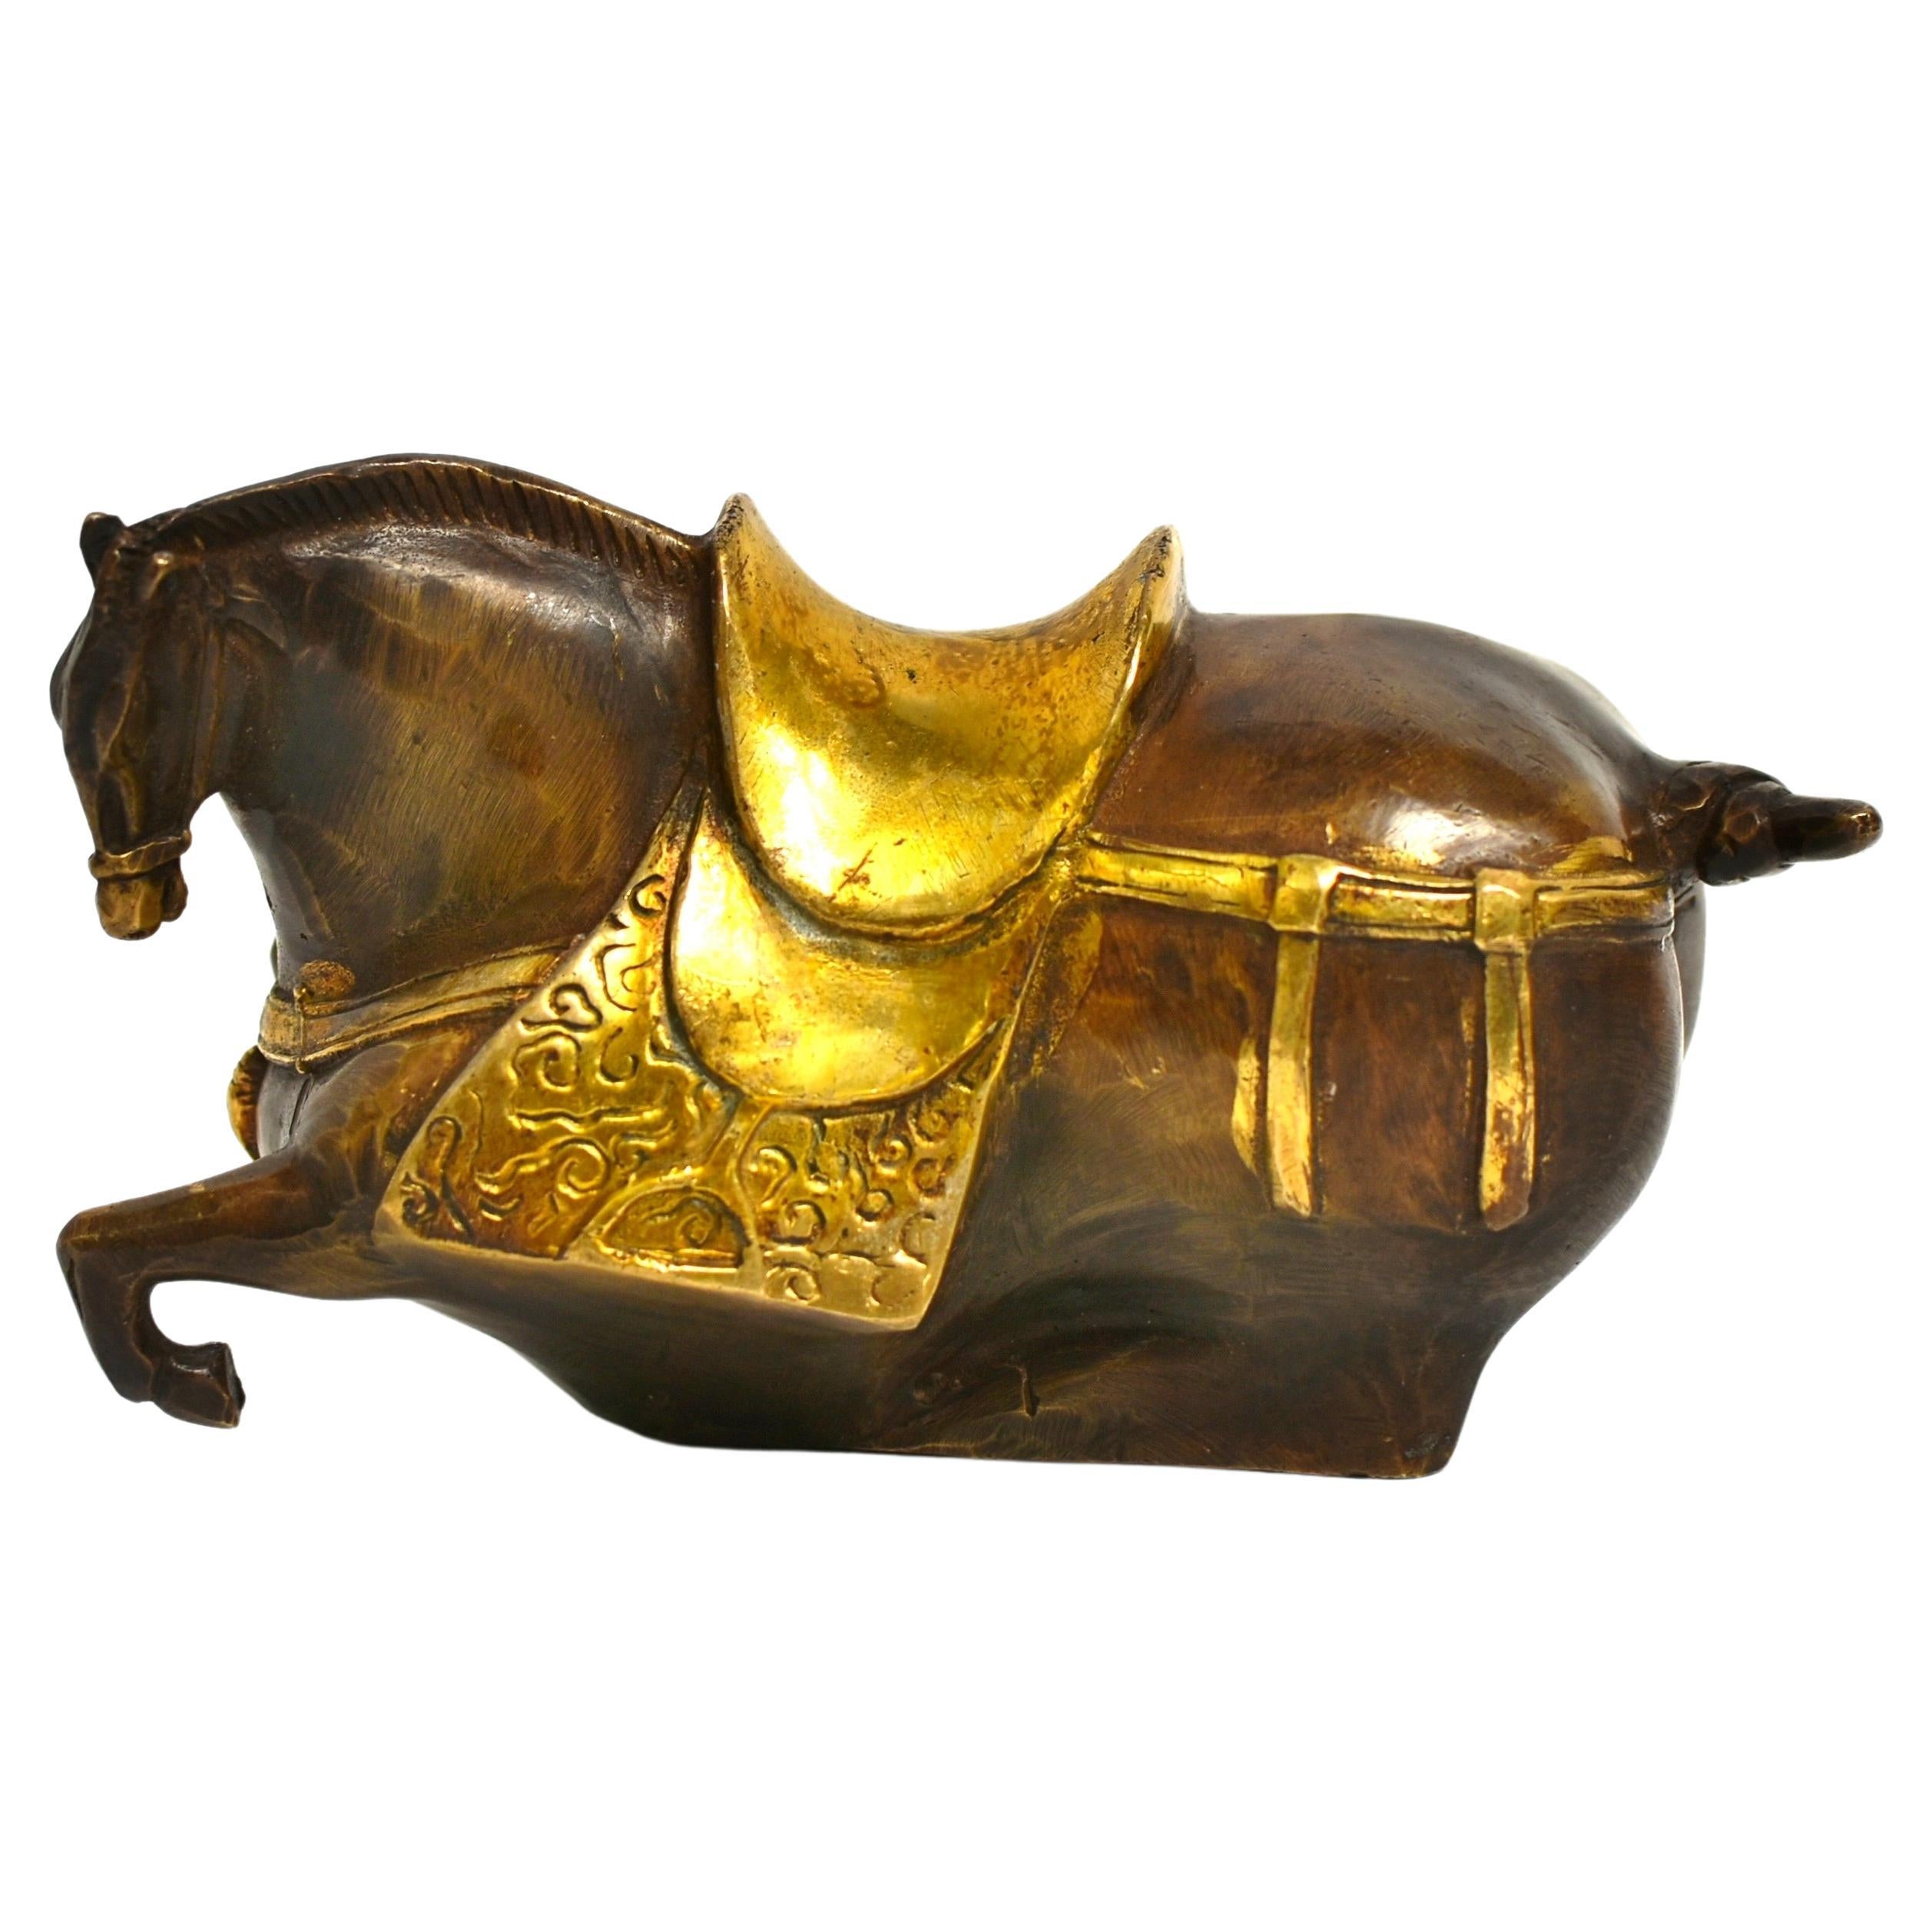 Bronze Recumbent Horse Han Style with Gilded Saddle